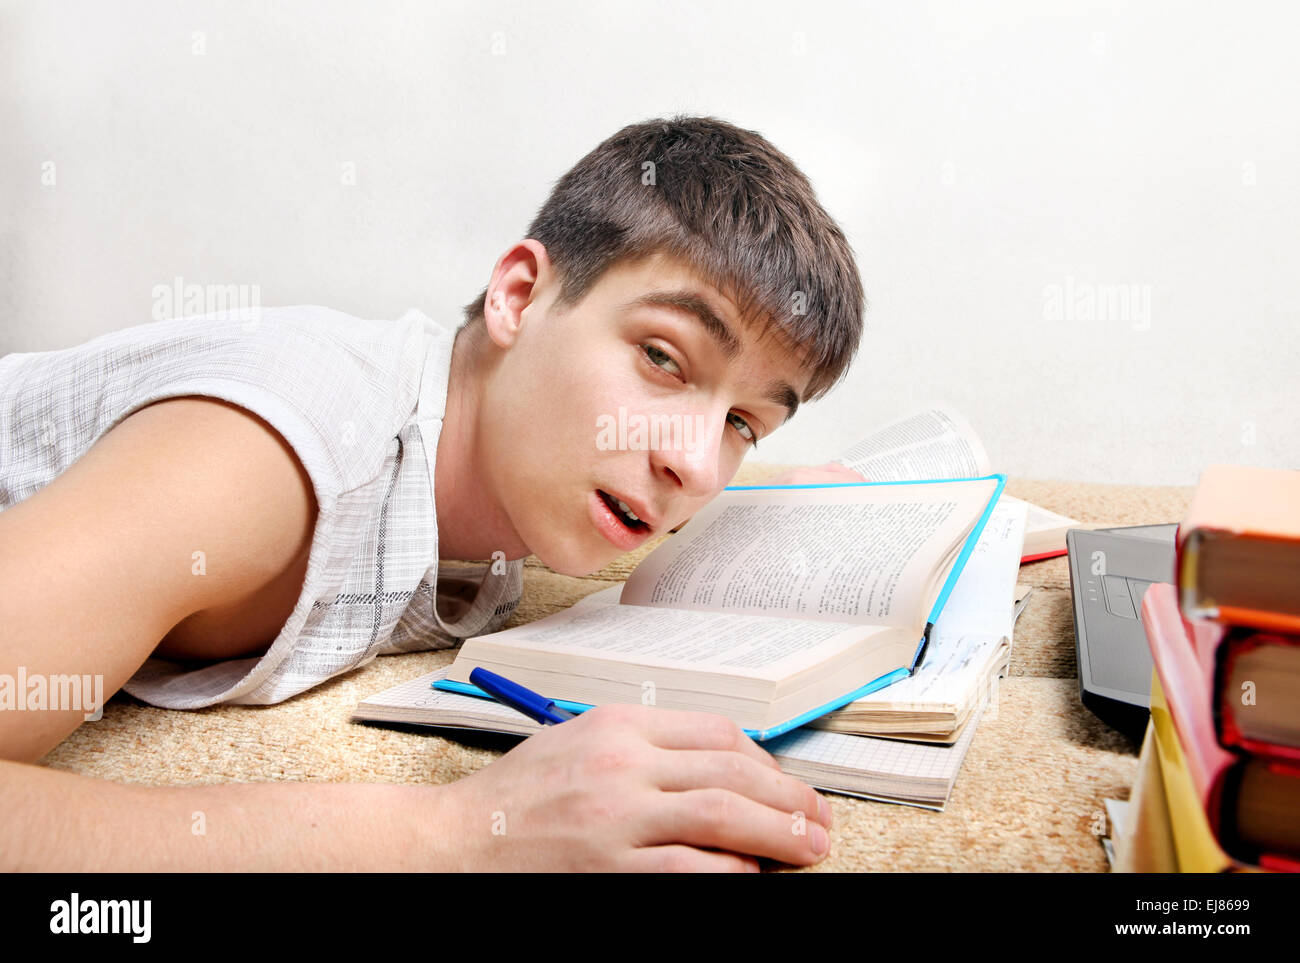 Tired Student Stock Photo